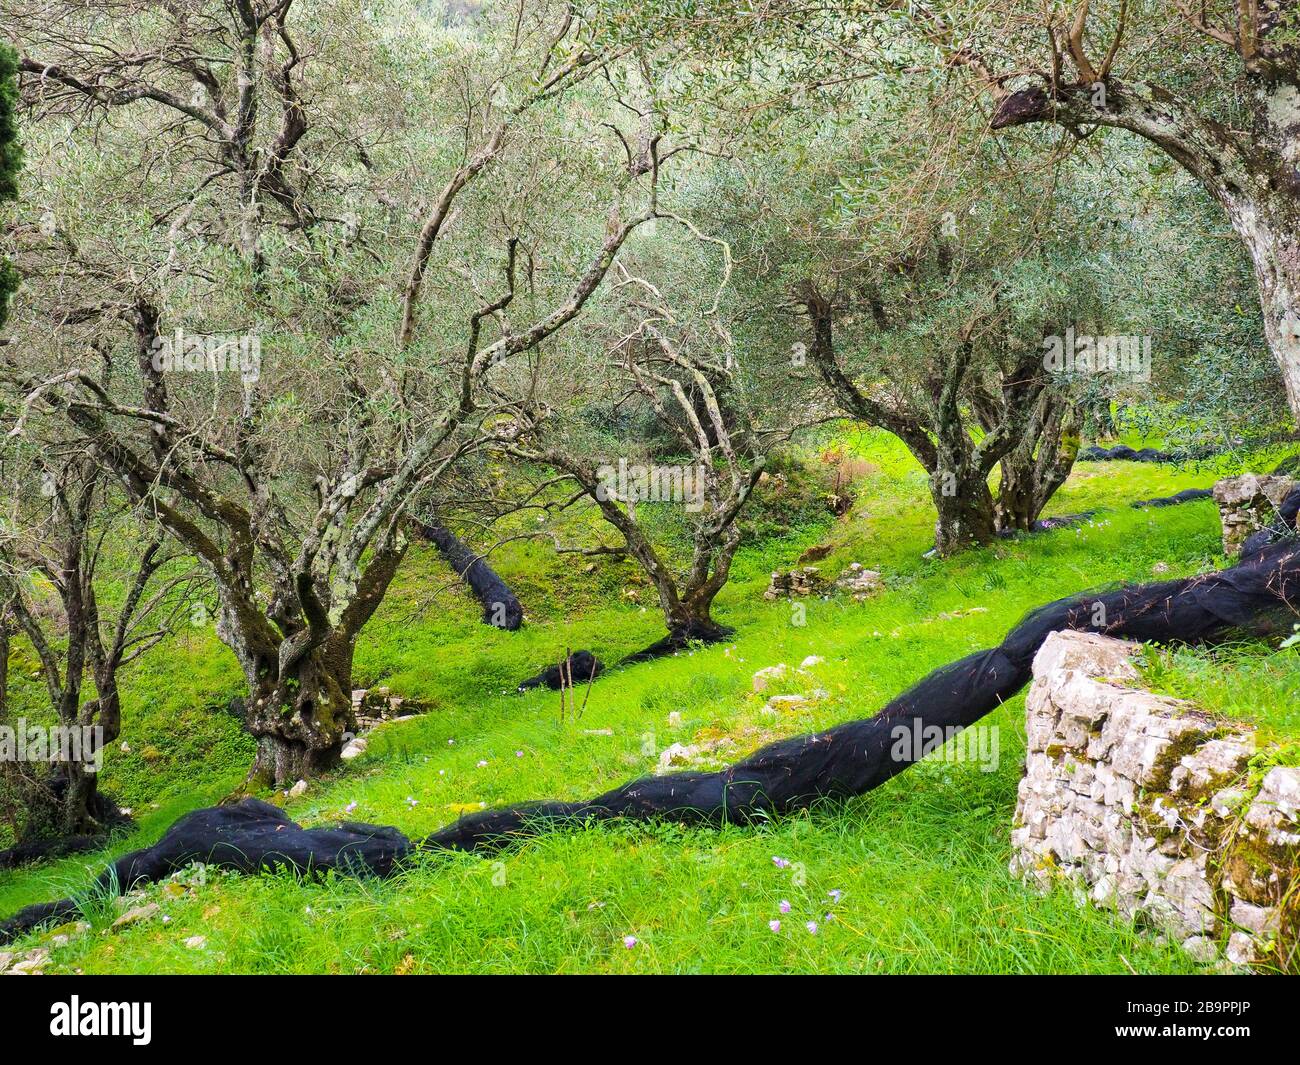 https://c8.alamy.com/comp/2B9PPJP/olive-grove-with-black-olive-nets-and-an-old-stone-wall-a-typical-greek-countryside-scene-2B9PPJP.jpg